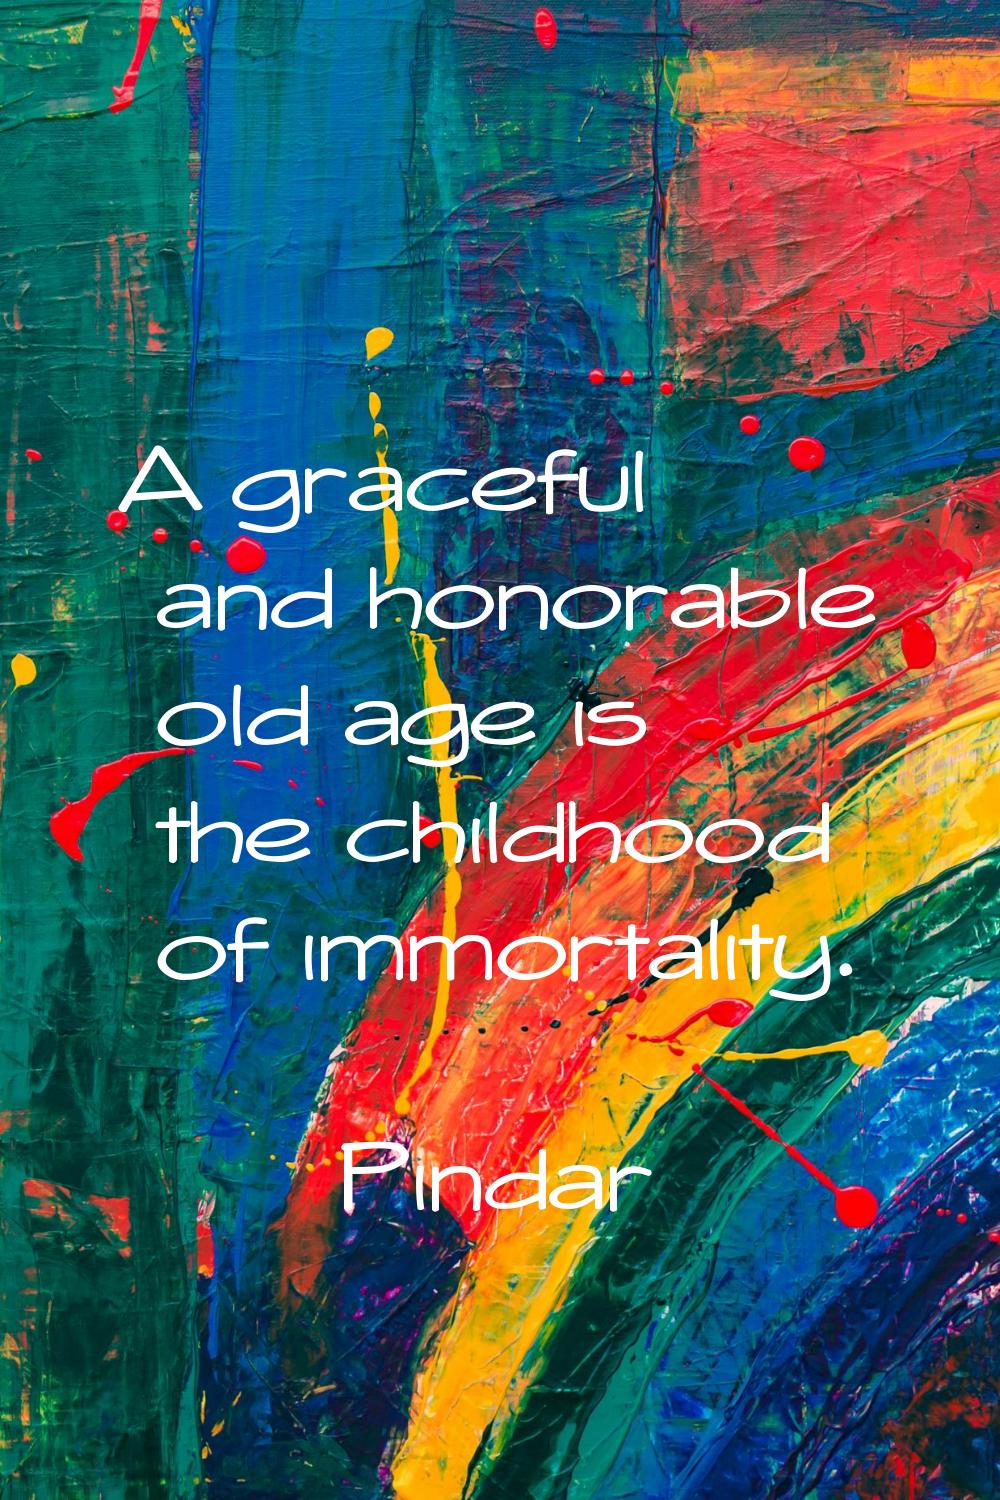 A graceful and honorable old age is the childhood of immortality.